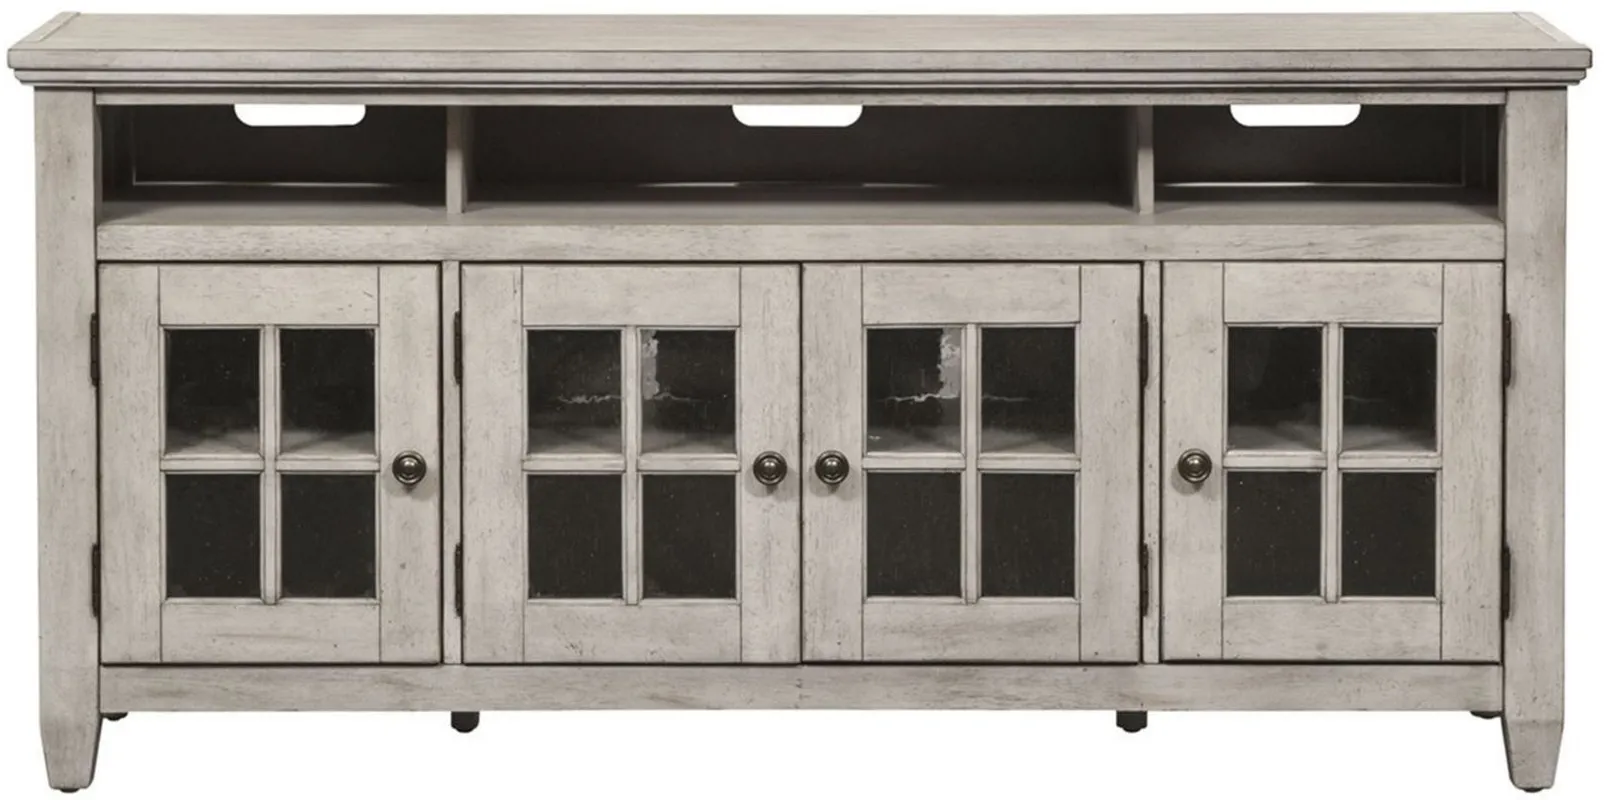 Magnolia Park TV Console in Two Tone White/Brown by Liberty Furniture